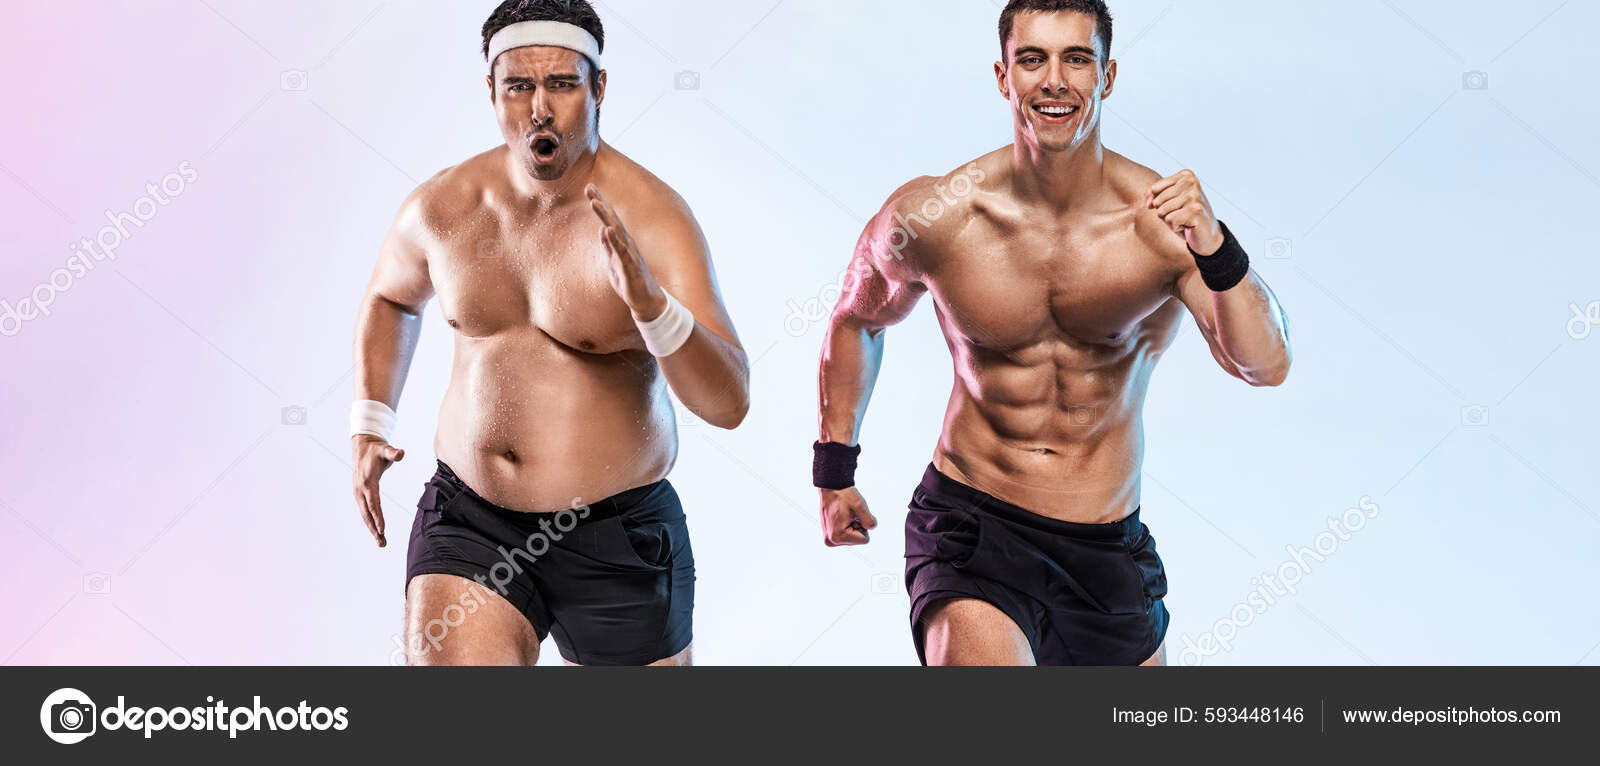 Very Fat Man Jogging Lose Weight Become Slim Athlete Running Stock Photo by  ©MikeOrlov 593448146